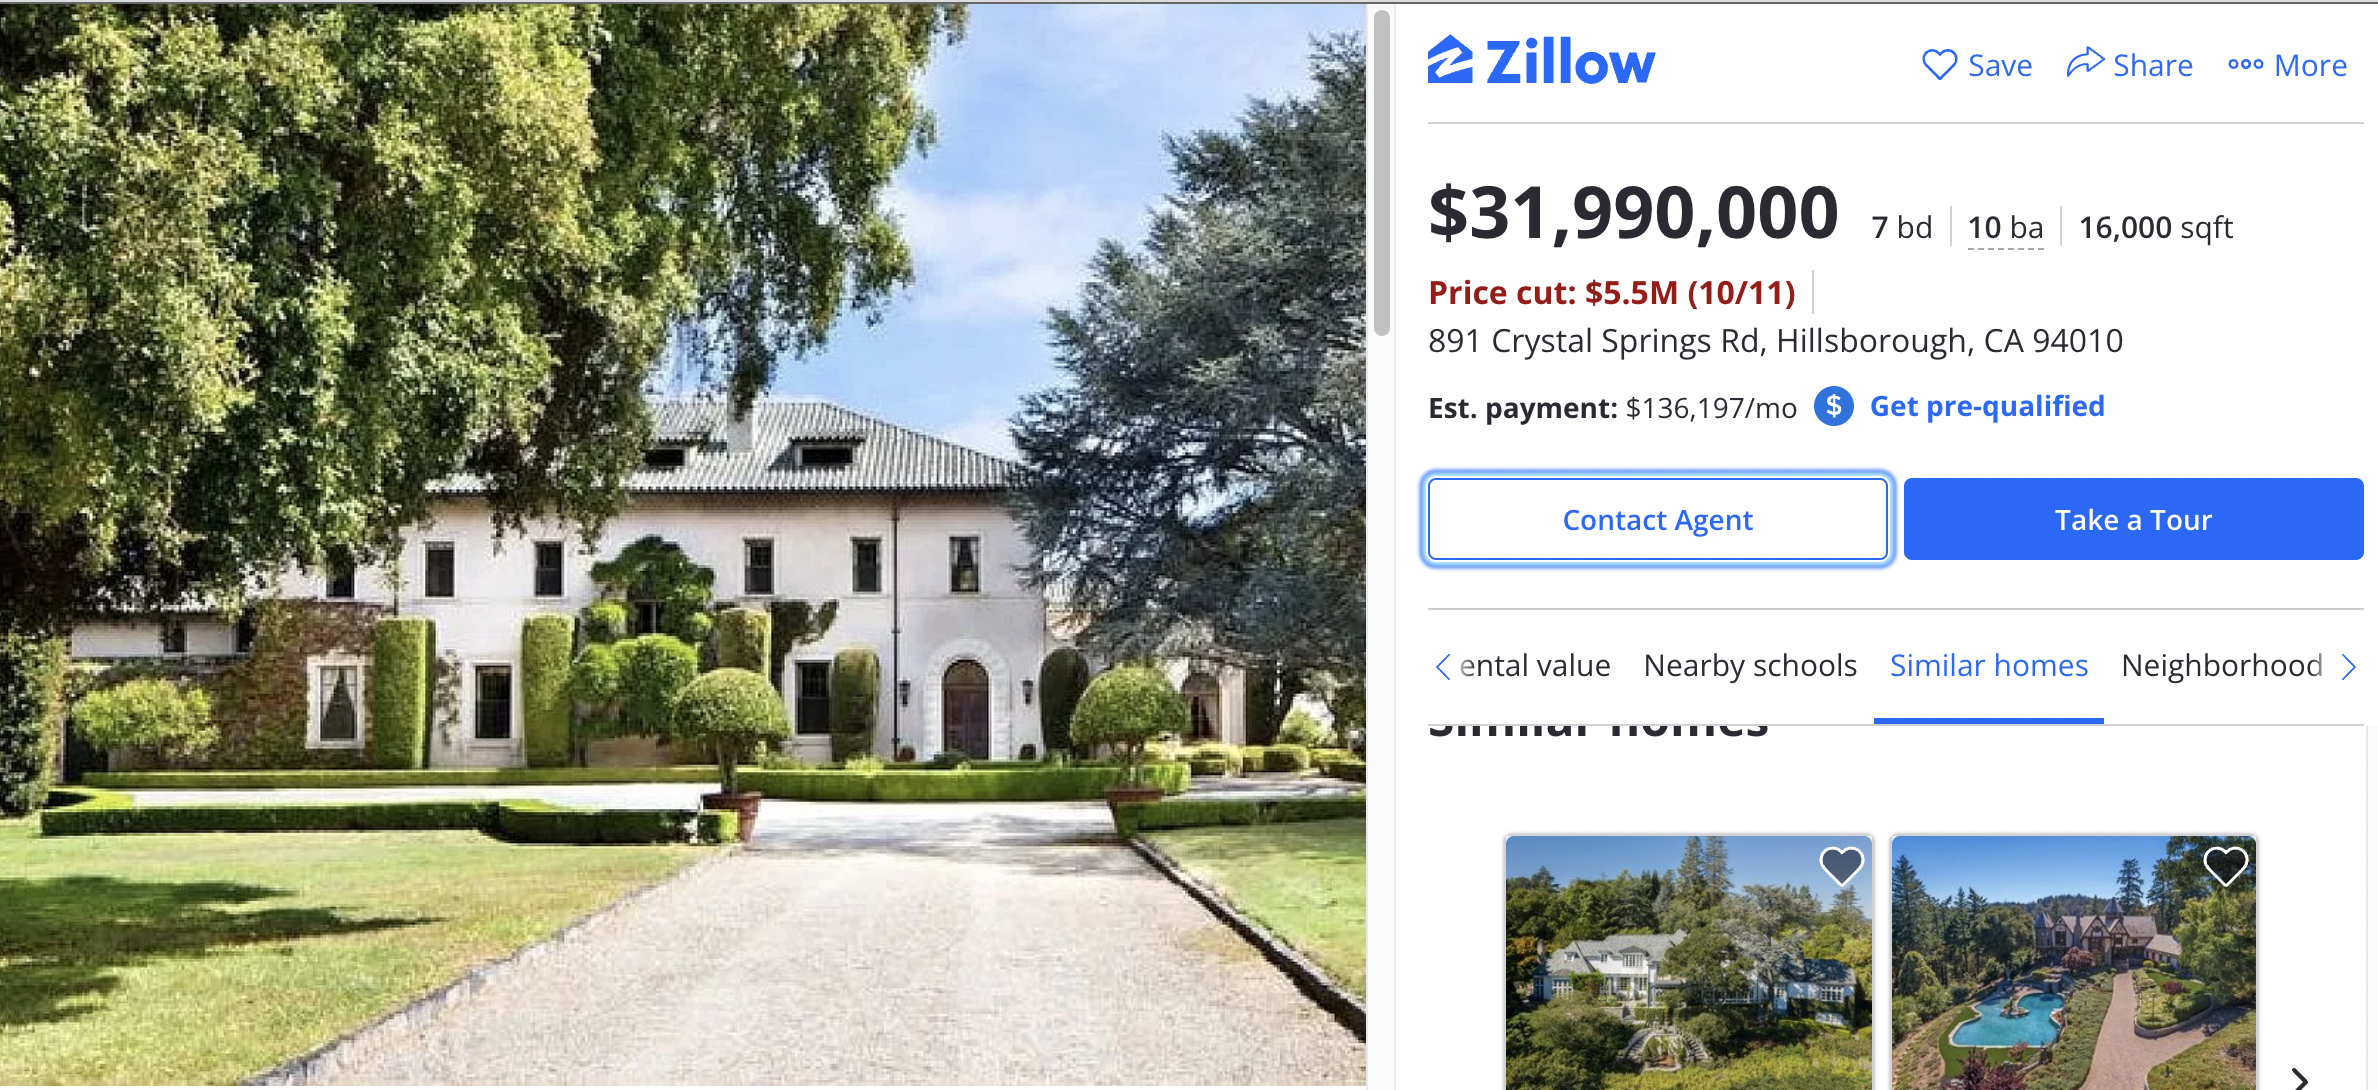 Zillow listing for Elon Musk's mansion, October 2021